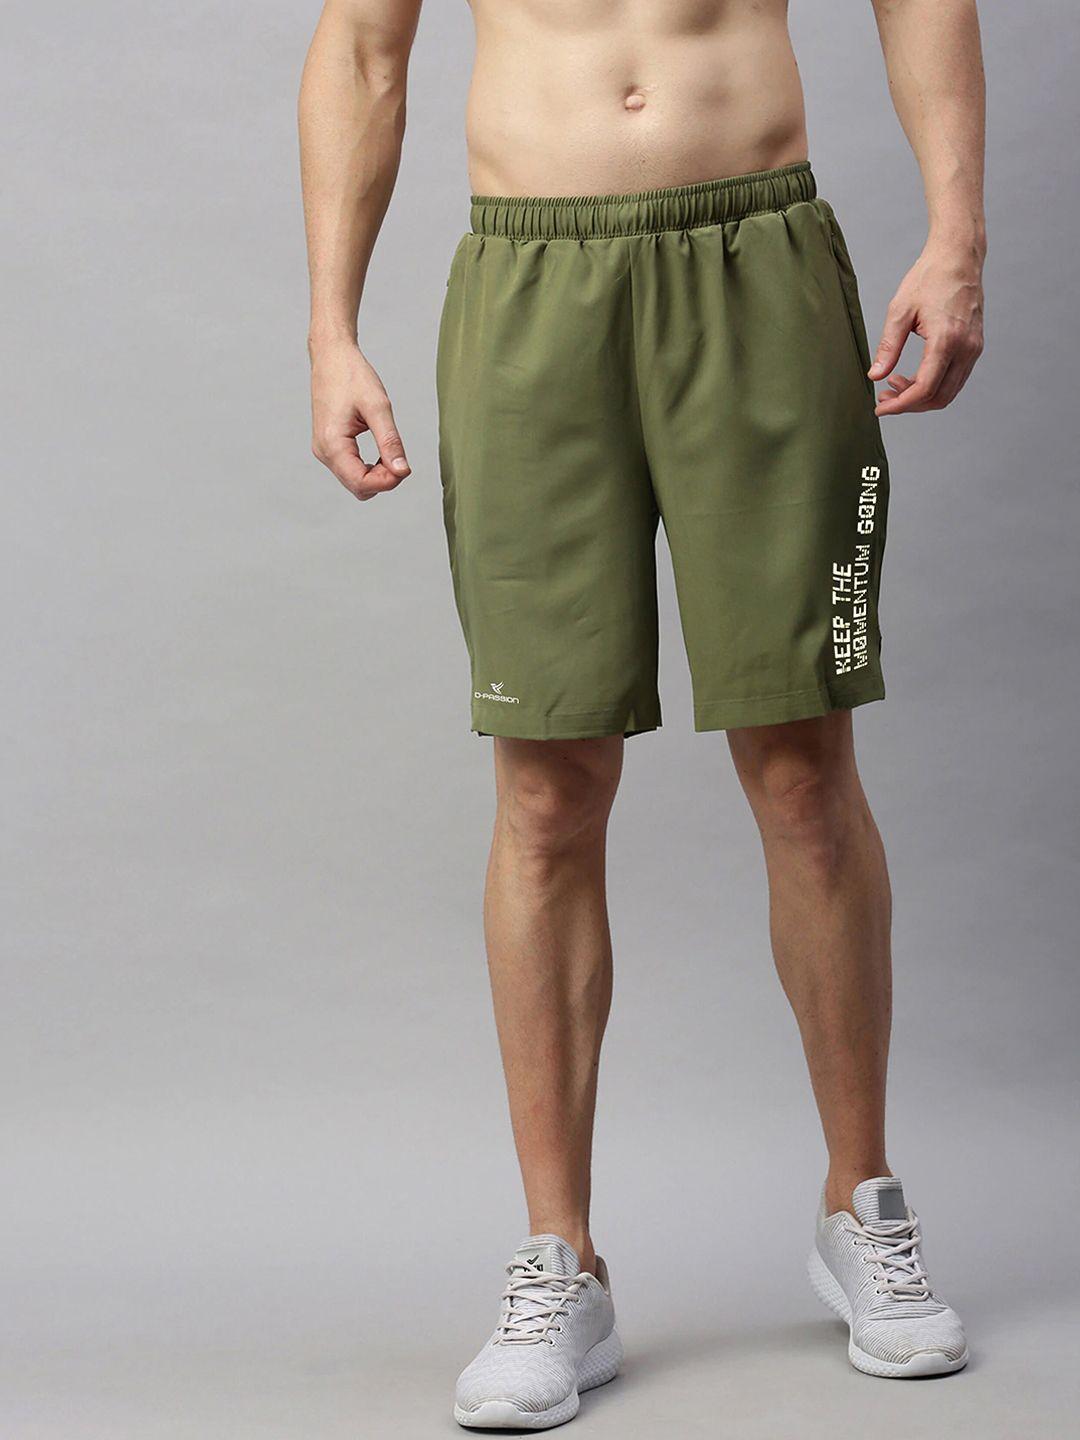 dpassion men olive green typography printed training or gym sports shorts